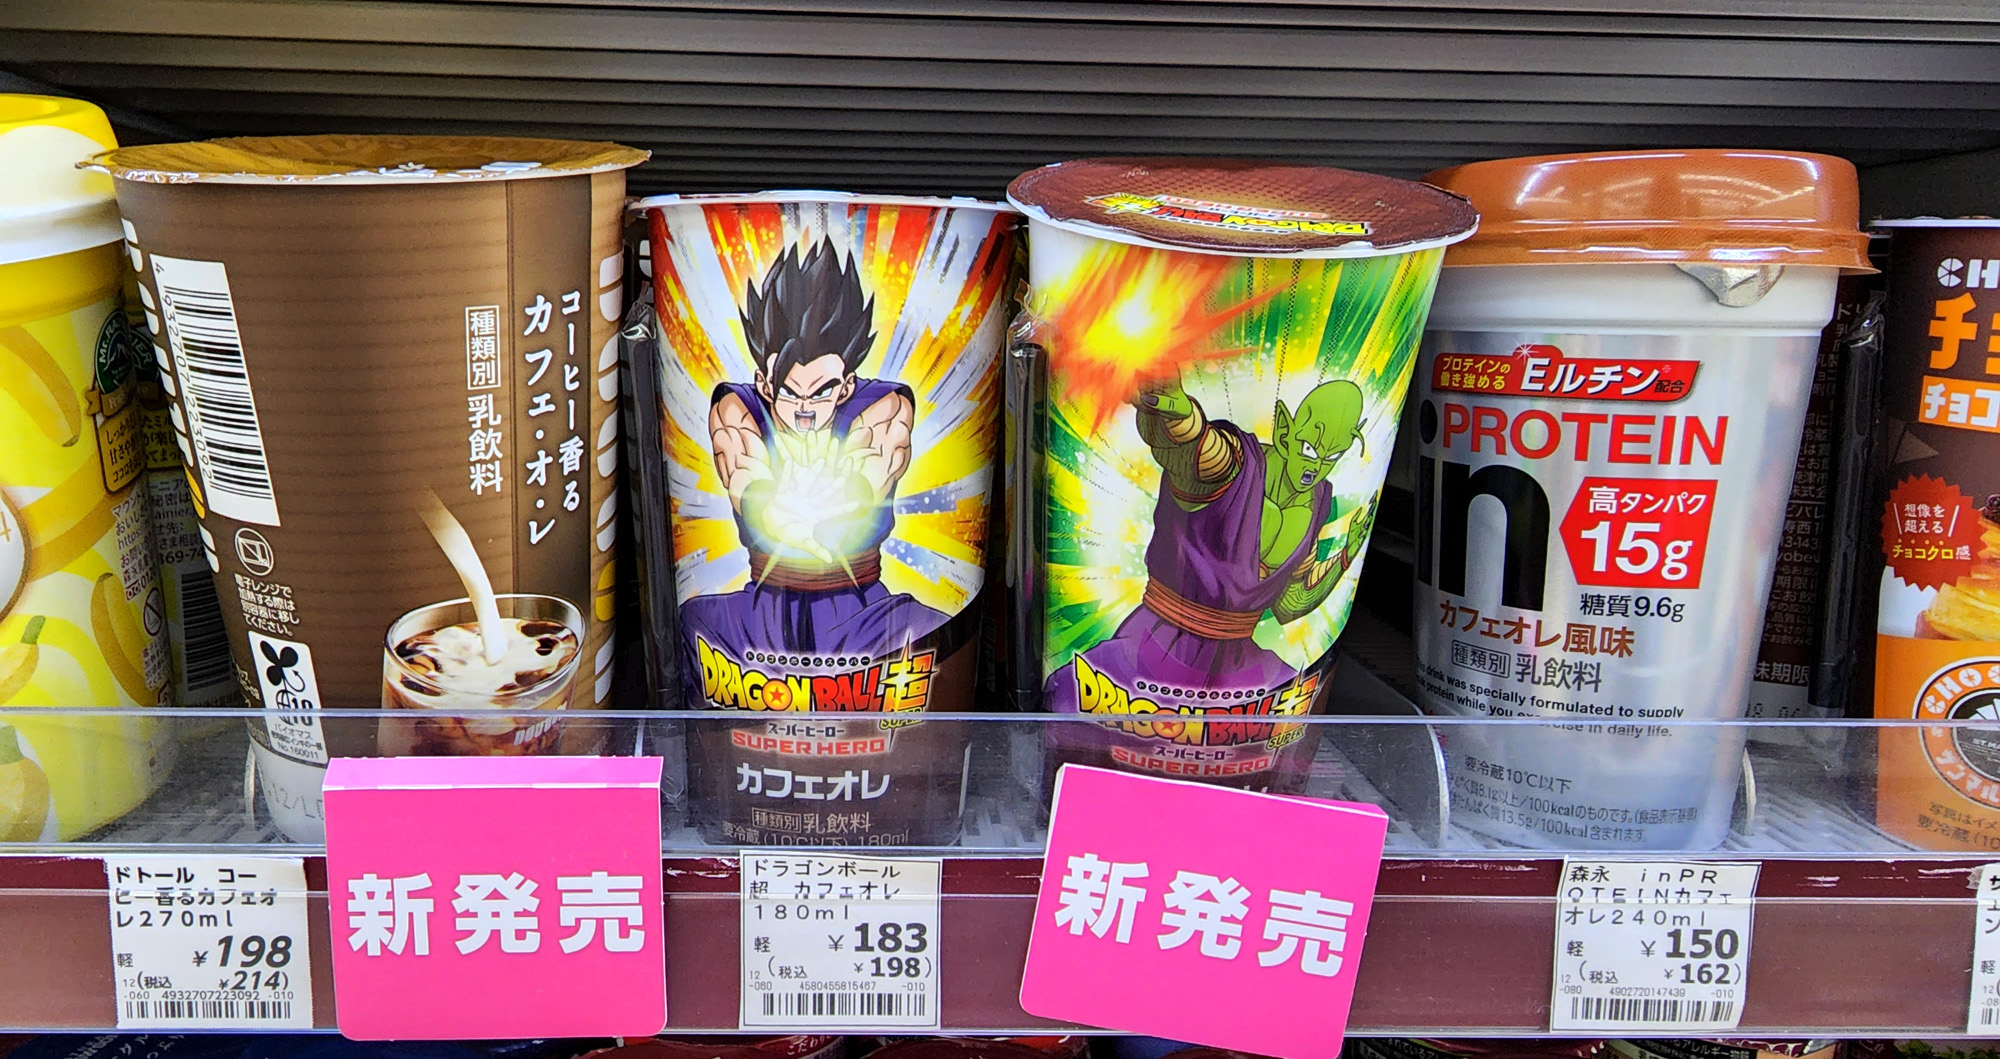 Dragon Ball Super: Super Hero Snacks and Goods Offered at Lawson